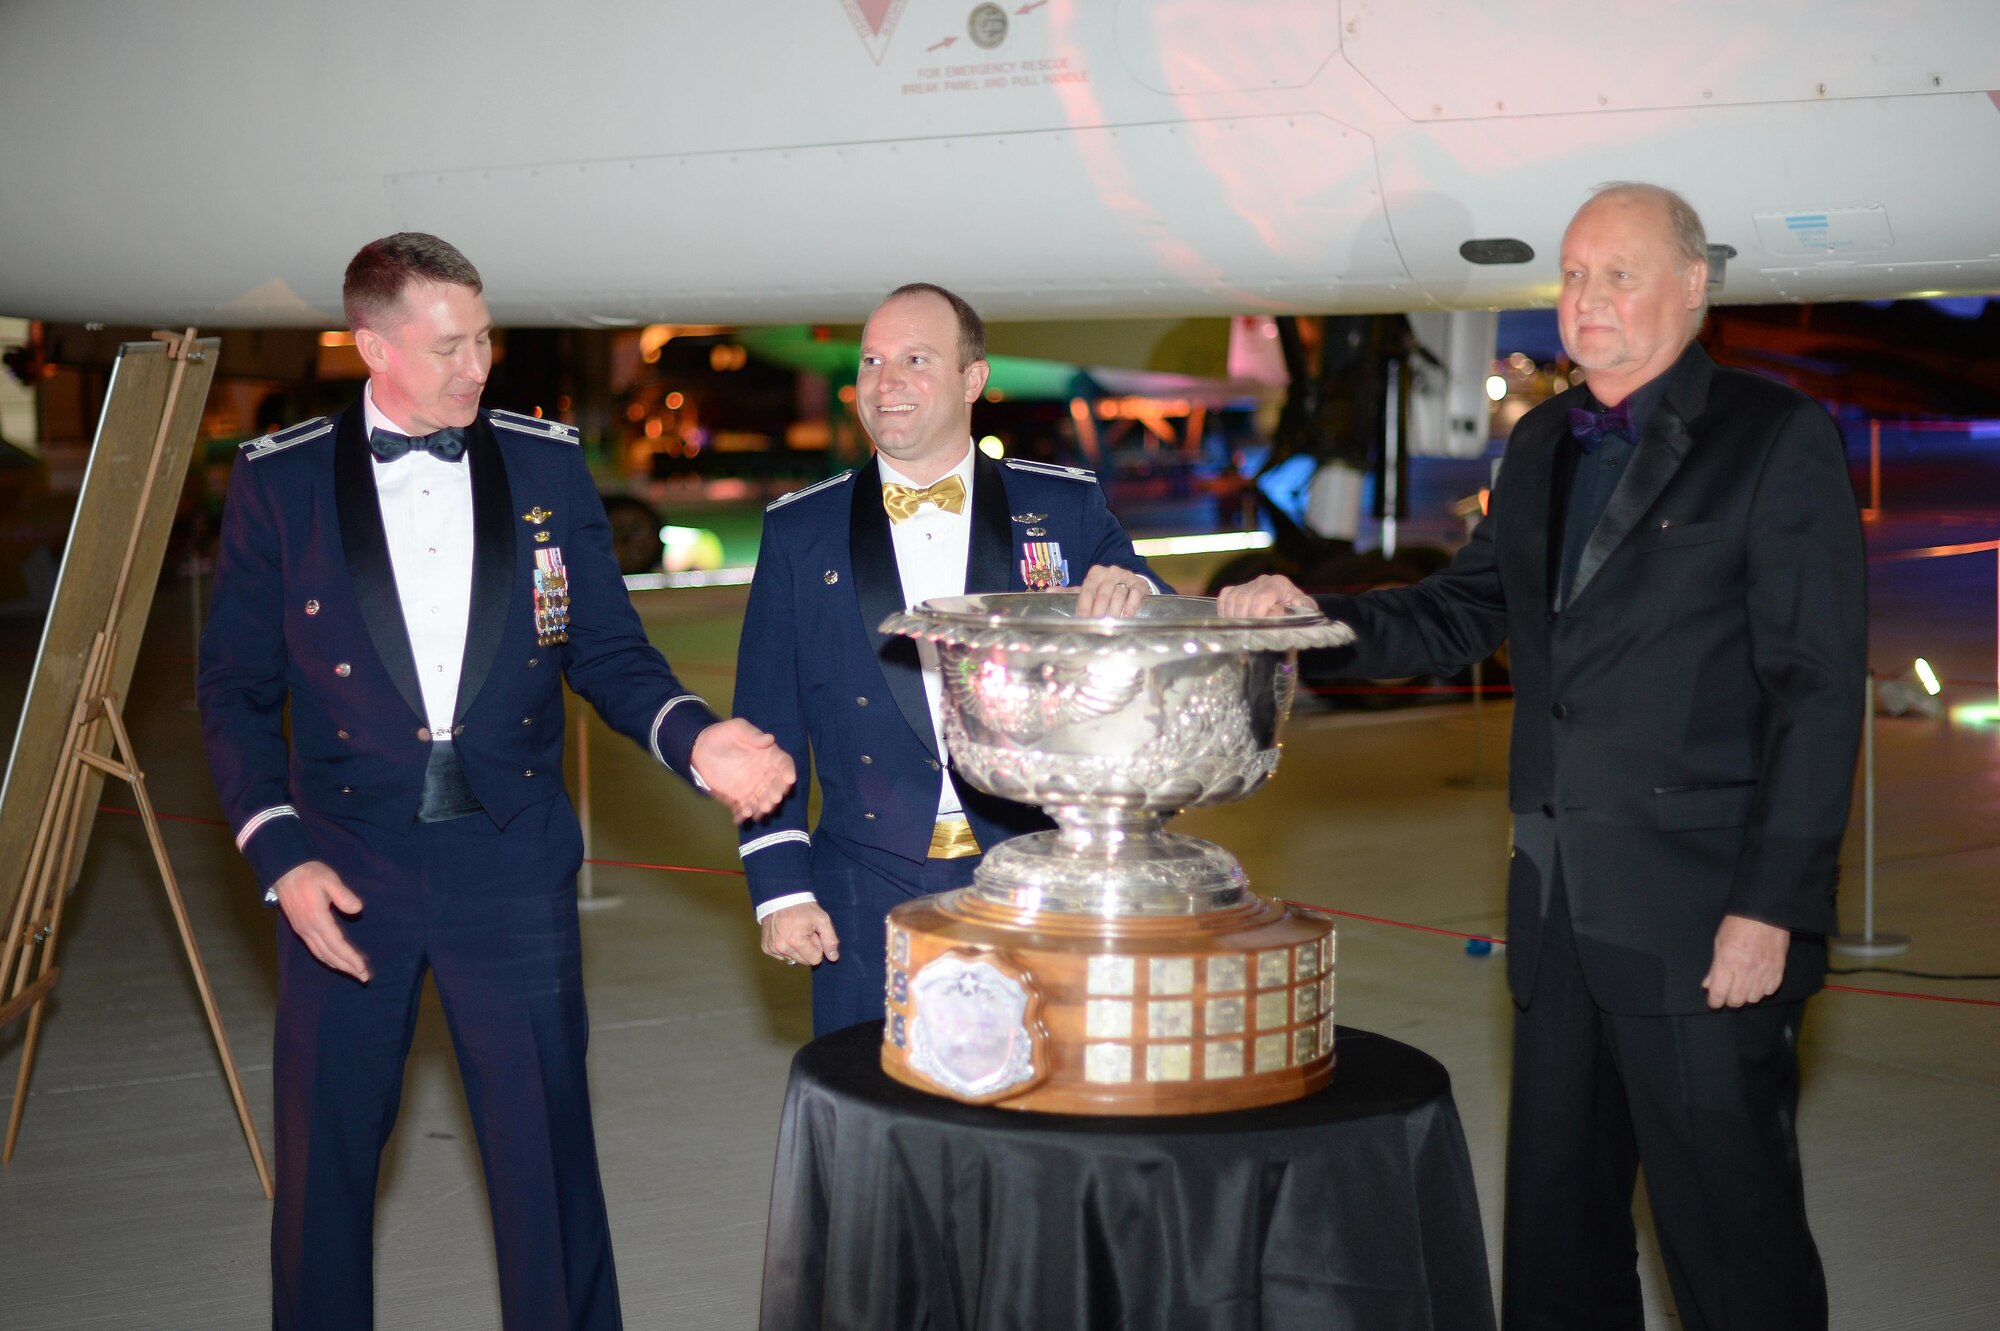 Rick Yuse, President of Raytheon Space and Airborne Systems, right, presents the Raytheon trophy to Lt. Col. Jason Zumwalt, 493rd Fighter Squadron commander and Col. Evan Pettus, 48th Fighter Wing commander, during a celebration at the Duxford Imperial War Museum, England, May 13. The 493rd FS received the trophy as the U.S. Air Force's top fighter squadron. (U.S. Air Force photo by Staff Sgt. Emerson Nuñez)